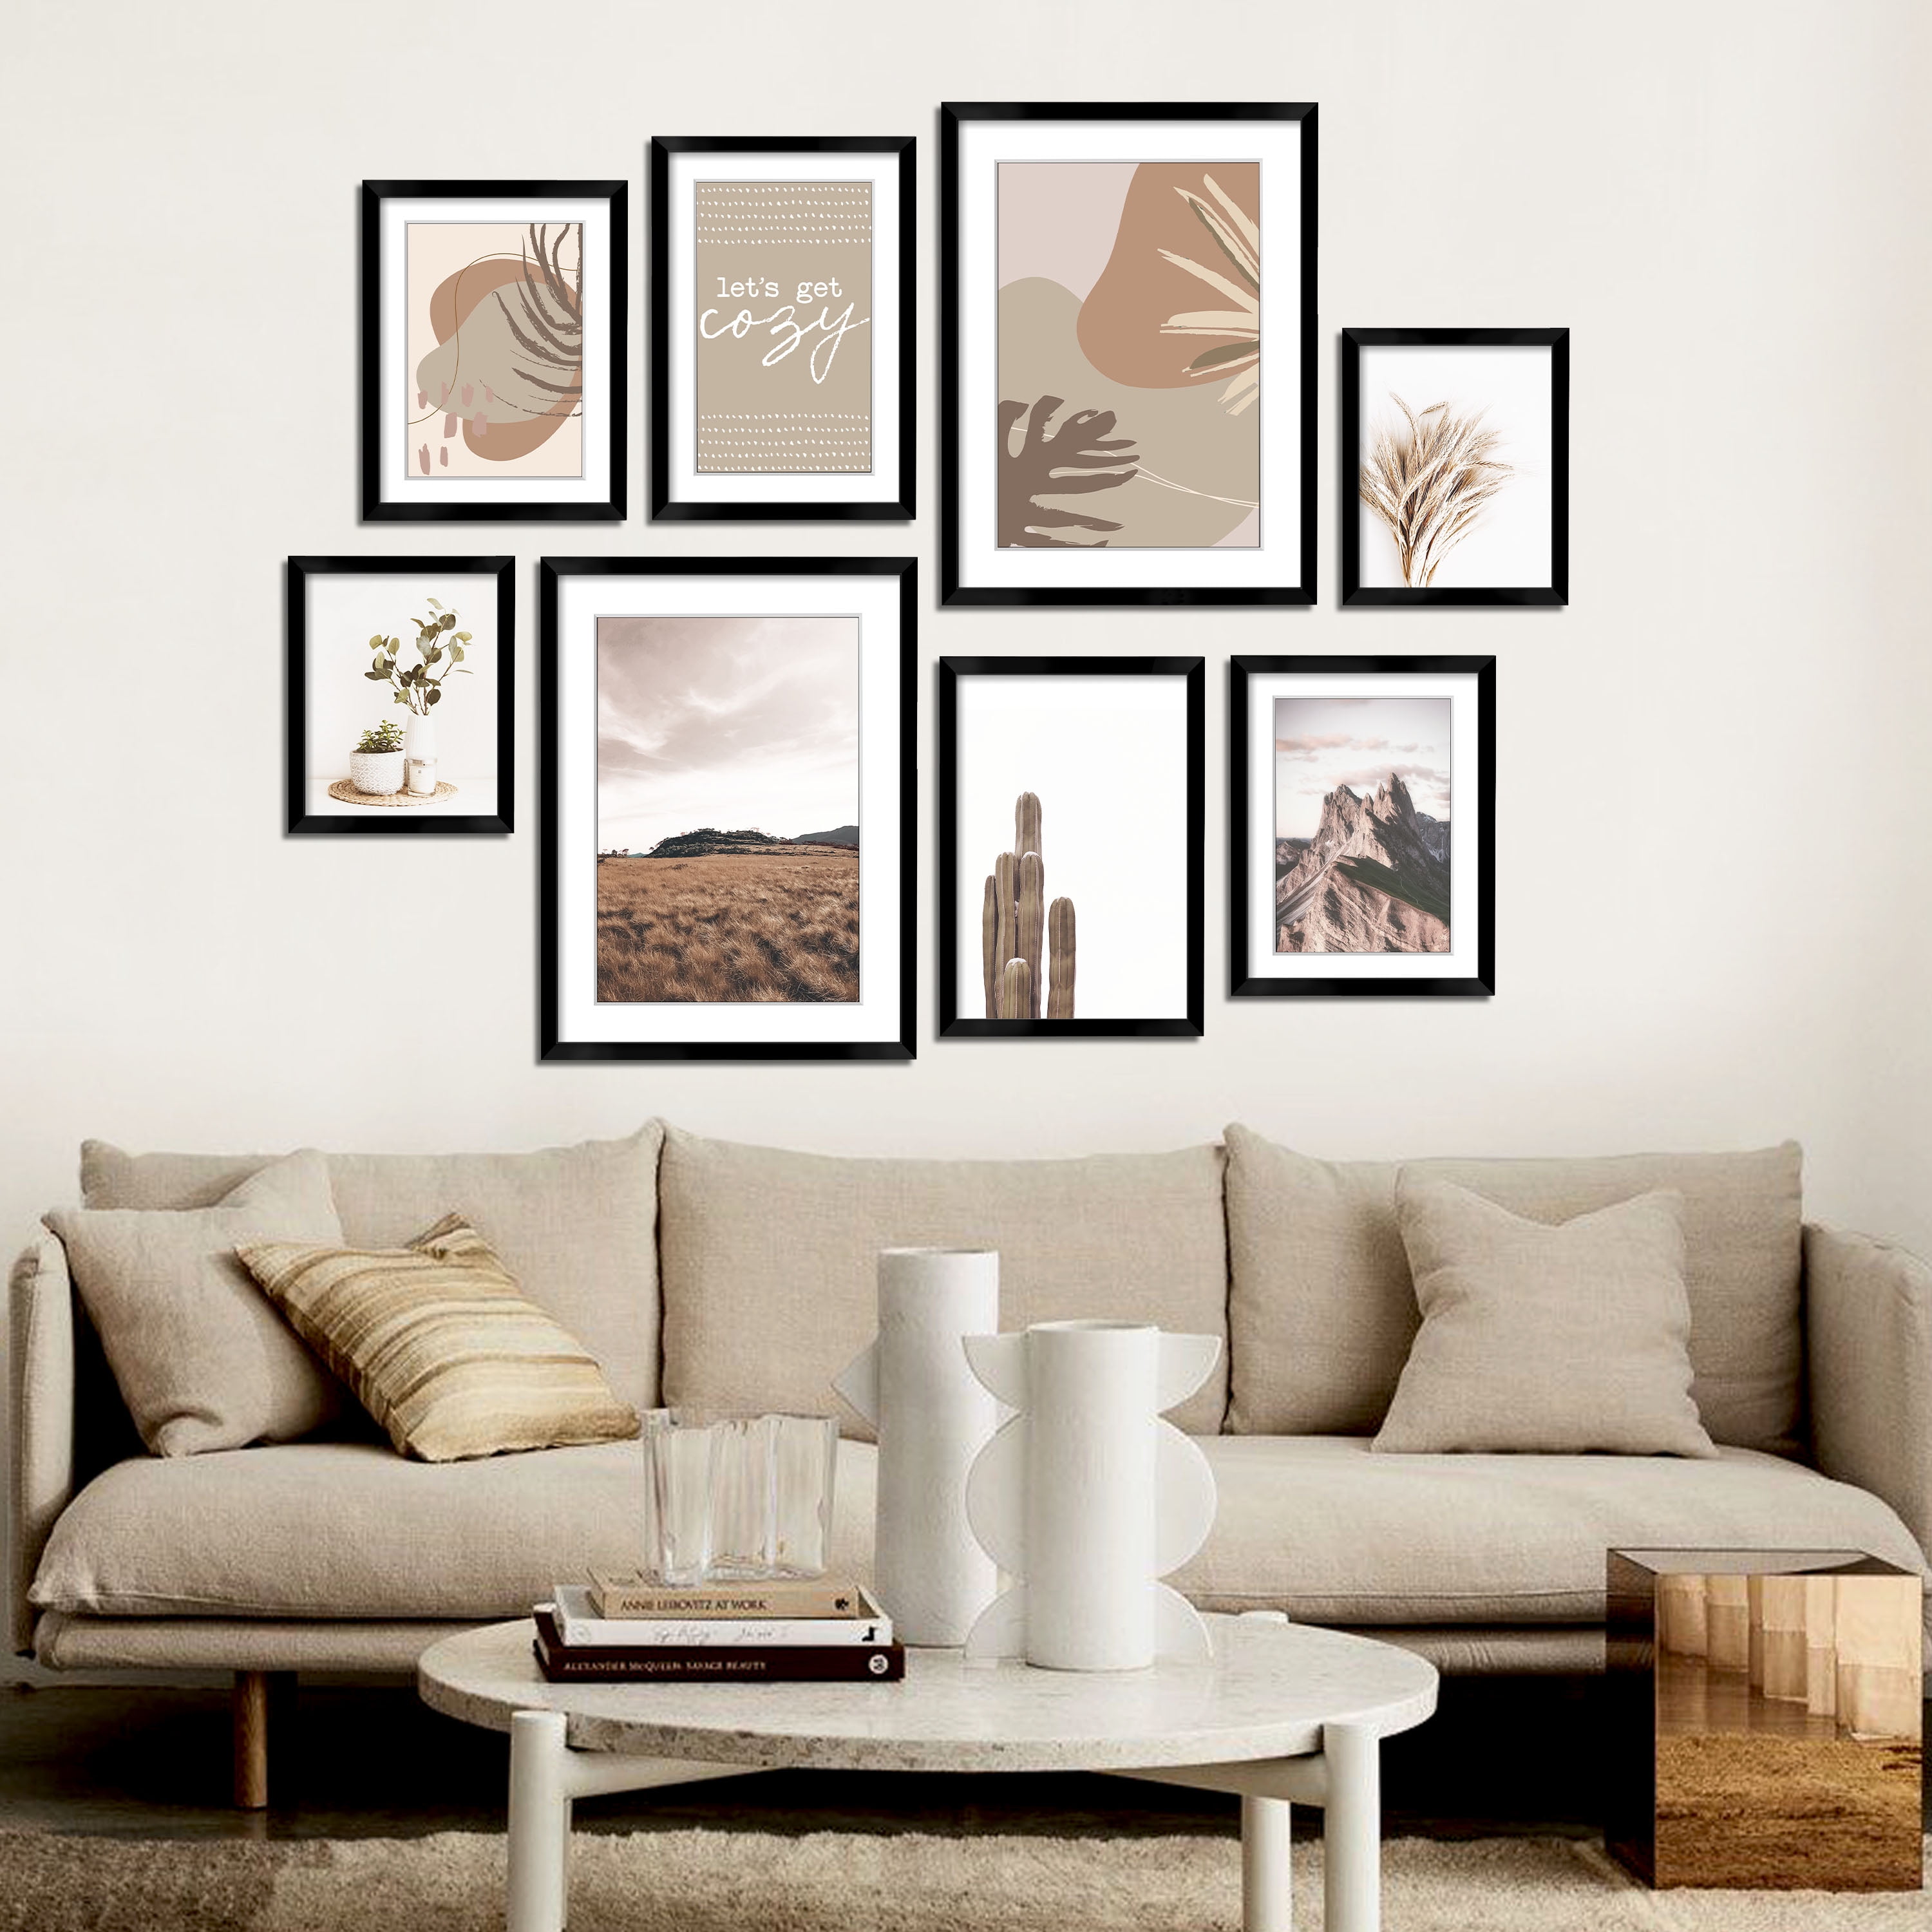 ArtbyHannah 8 Pack Modern Neutral Gallery Wall Kit Decorative Art Prints Picture Frame Collage Wall Art Decor for Home Decoration,Multi Size 12 x 16,8 x 12,8 x 10,6 x 8 Inch 